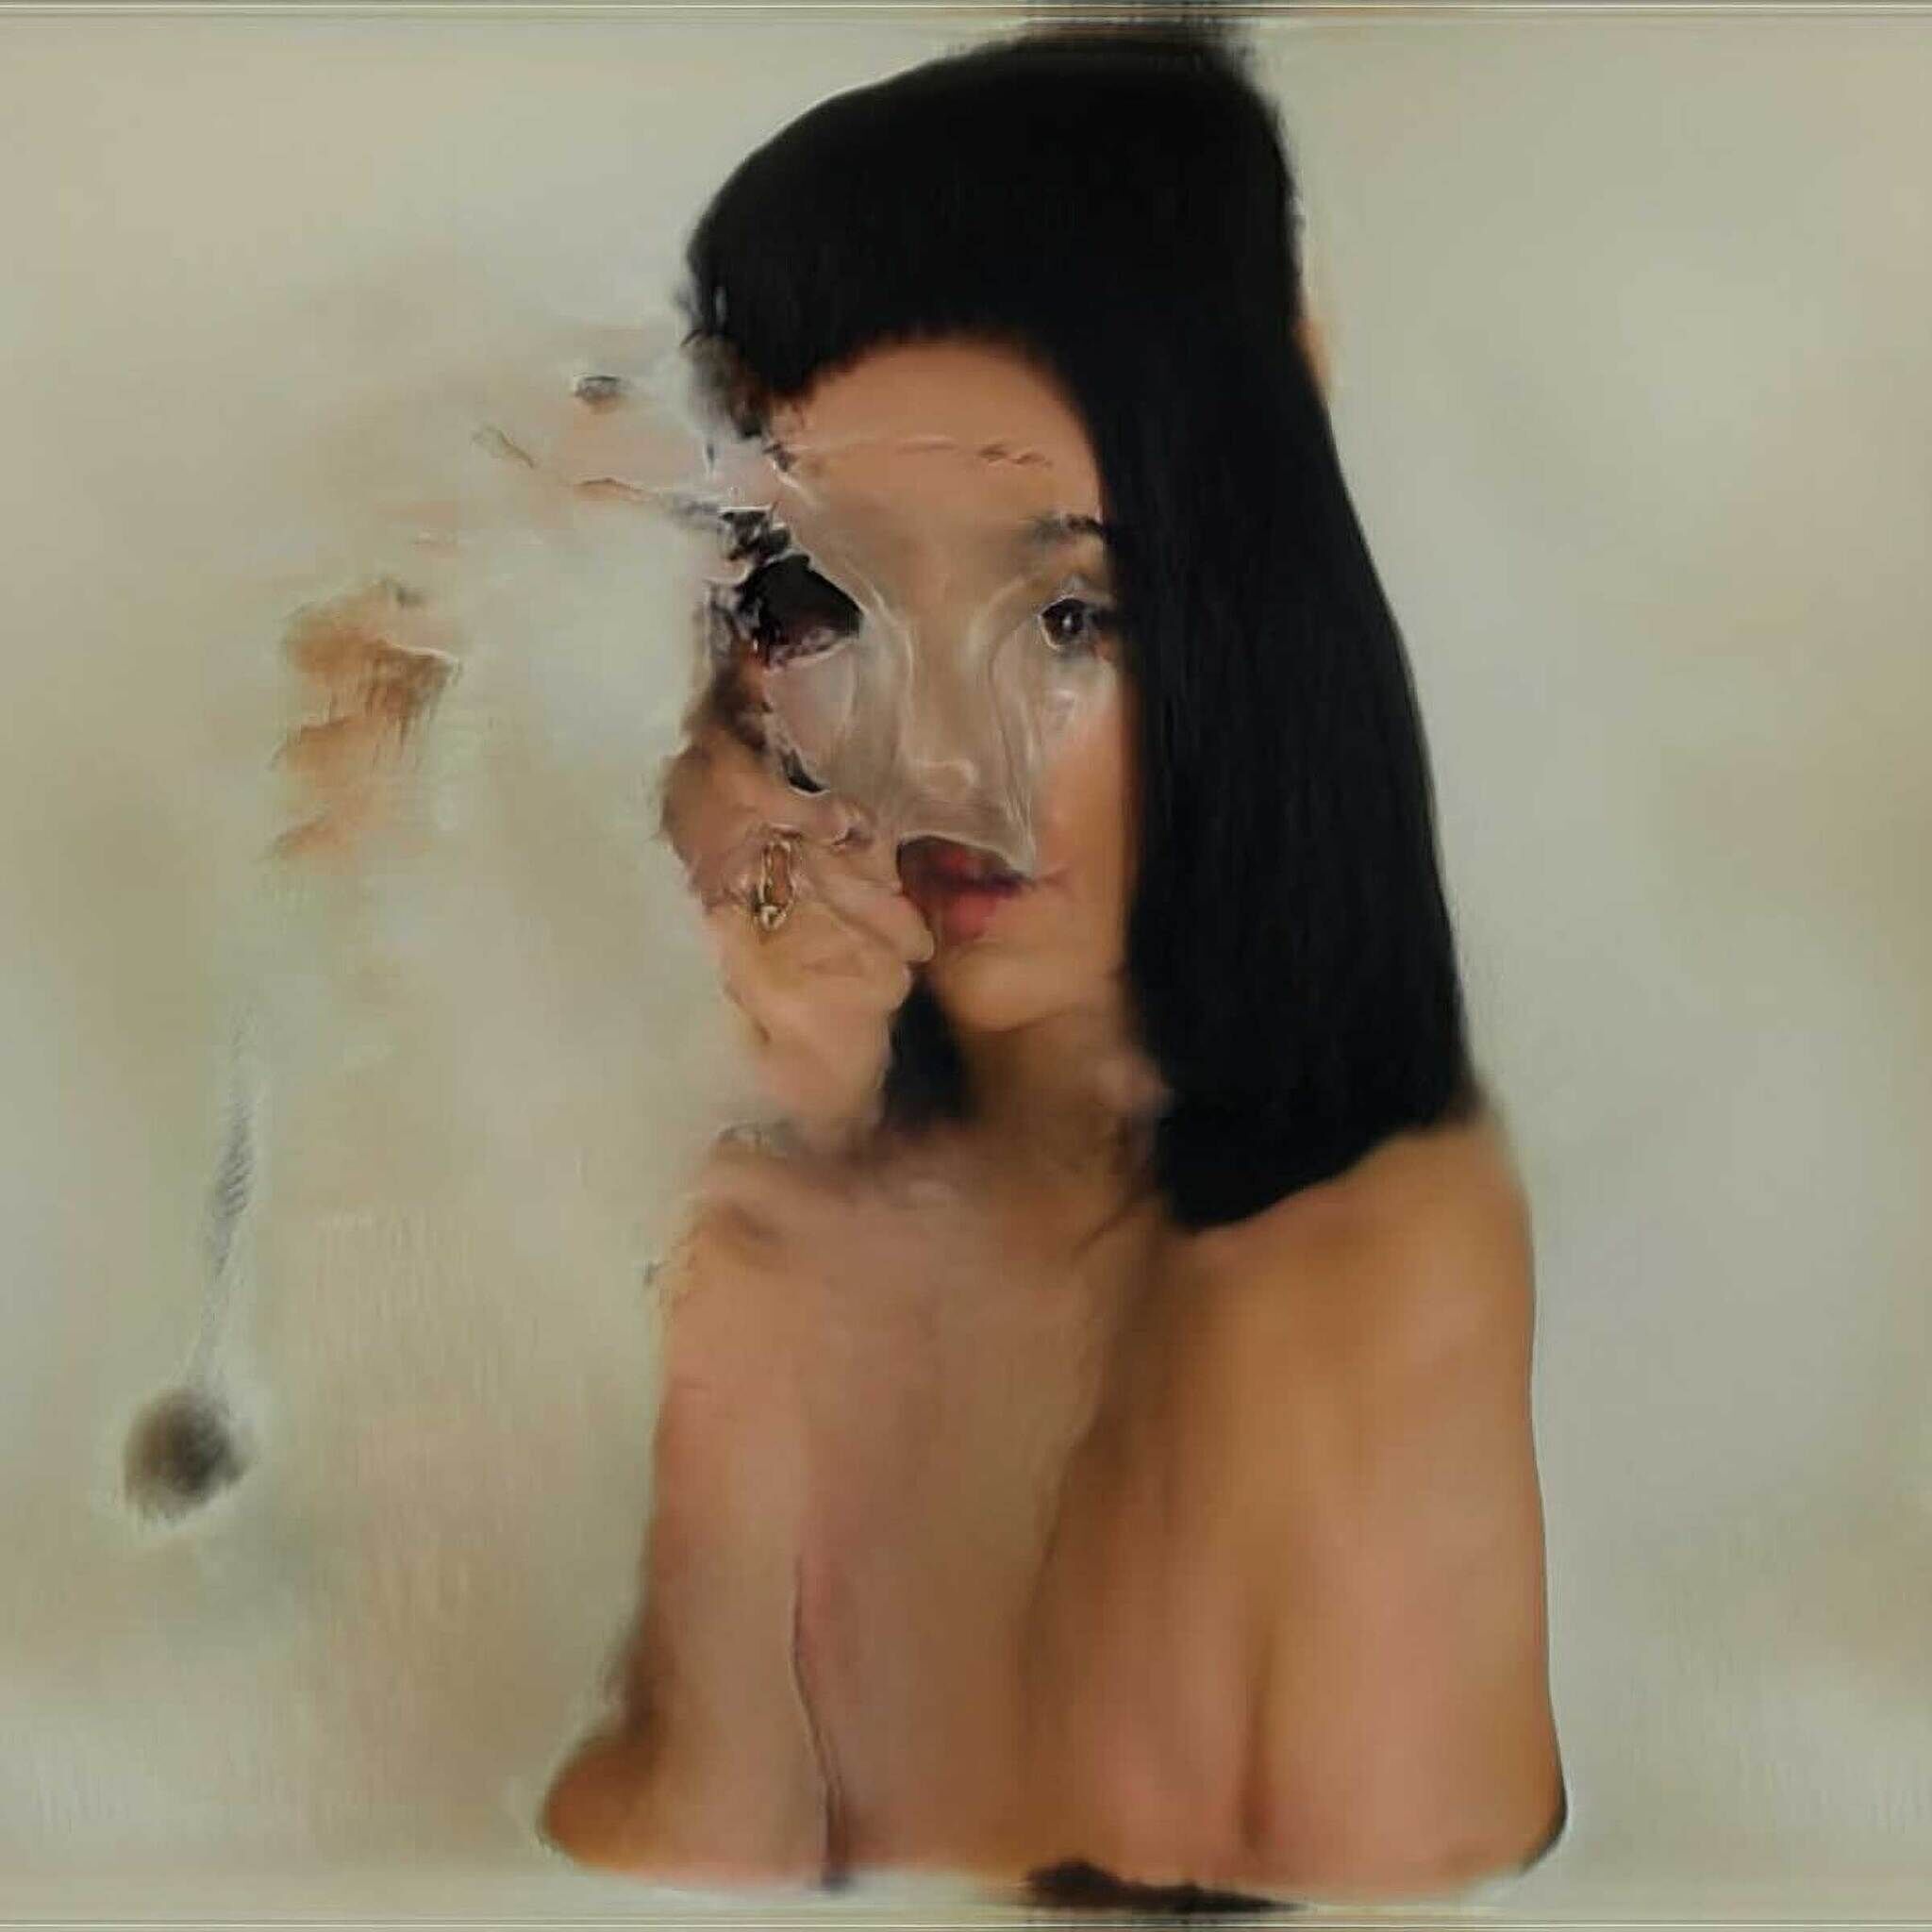 A woman with black hair appears behind a distorted glass pane, her face and hand visibly smeared.